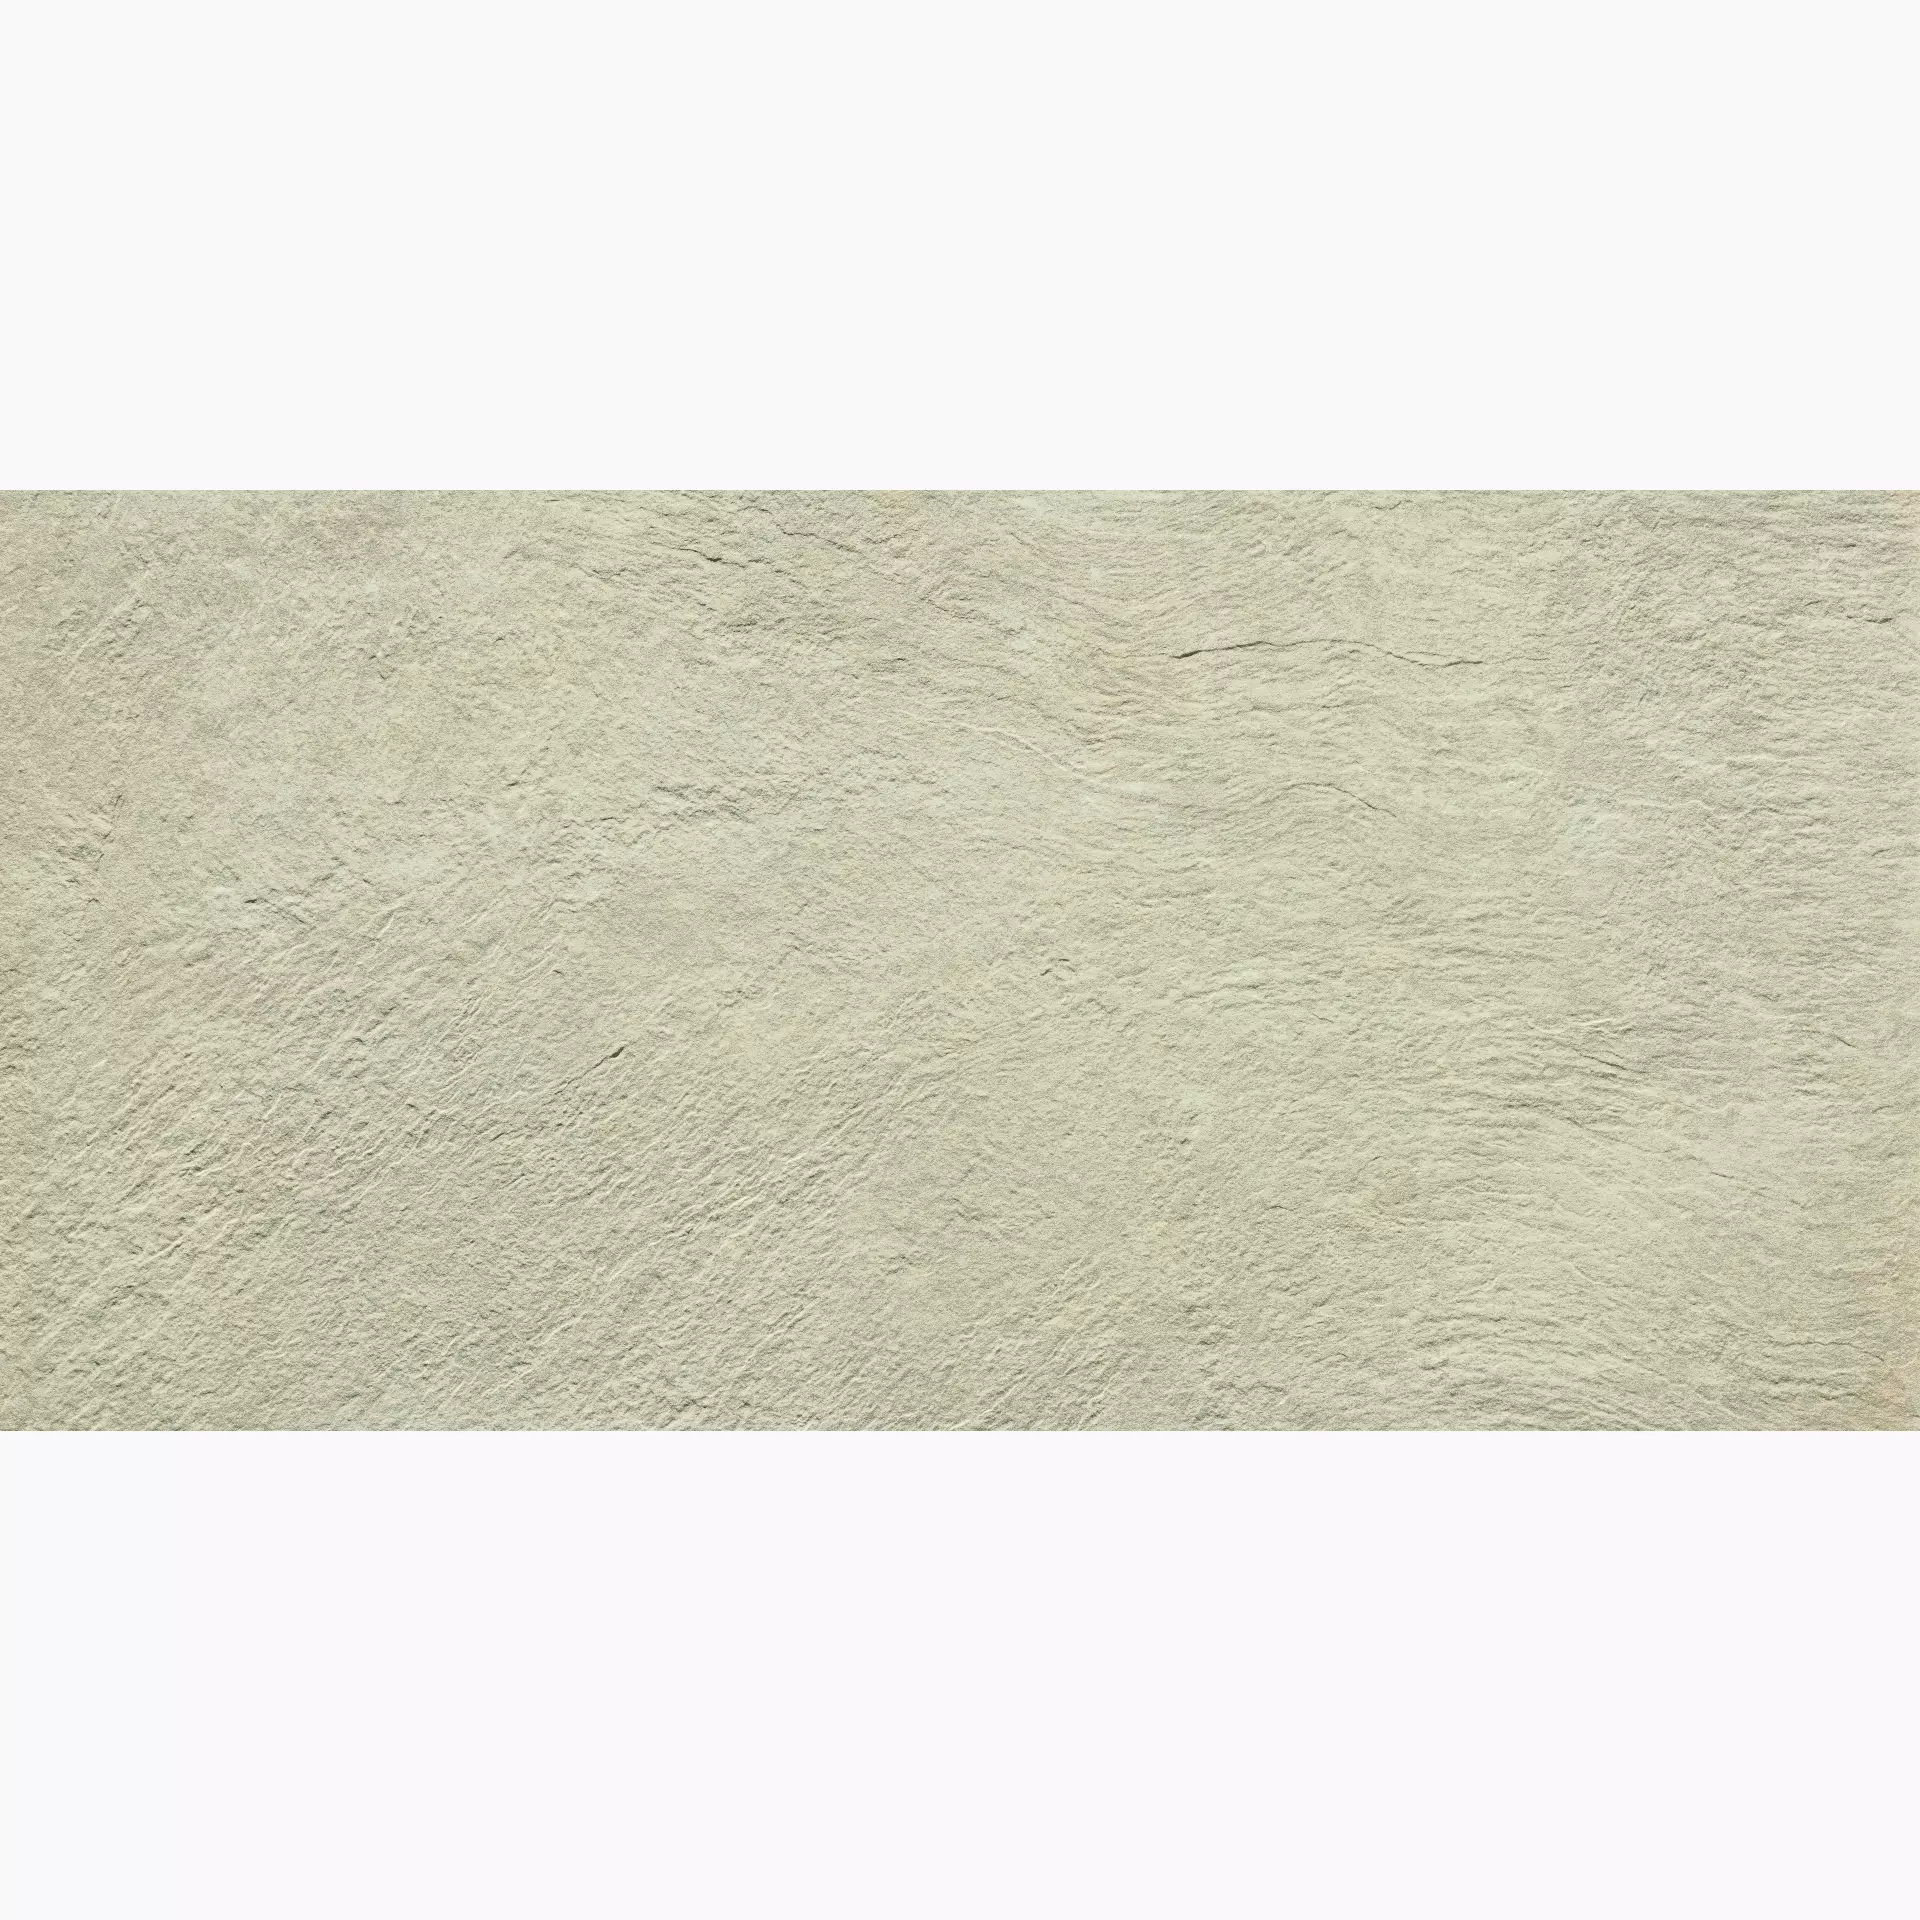 Cercom Absolute Clay Naturale 1076226 60x120cm rectified 9,5mm